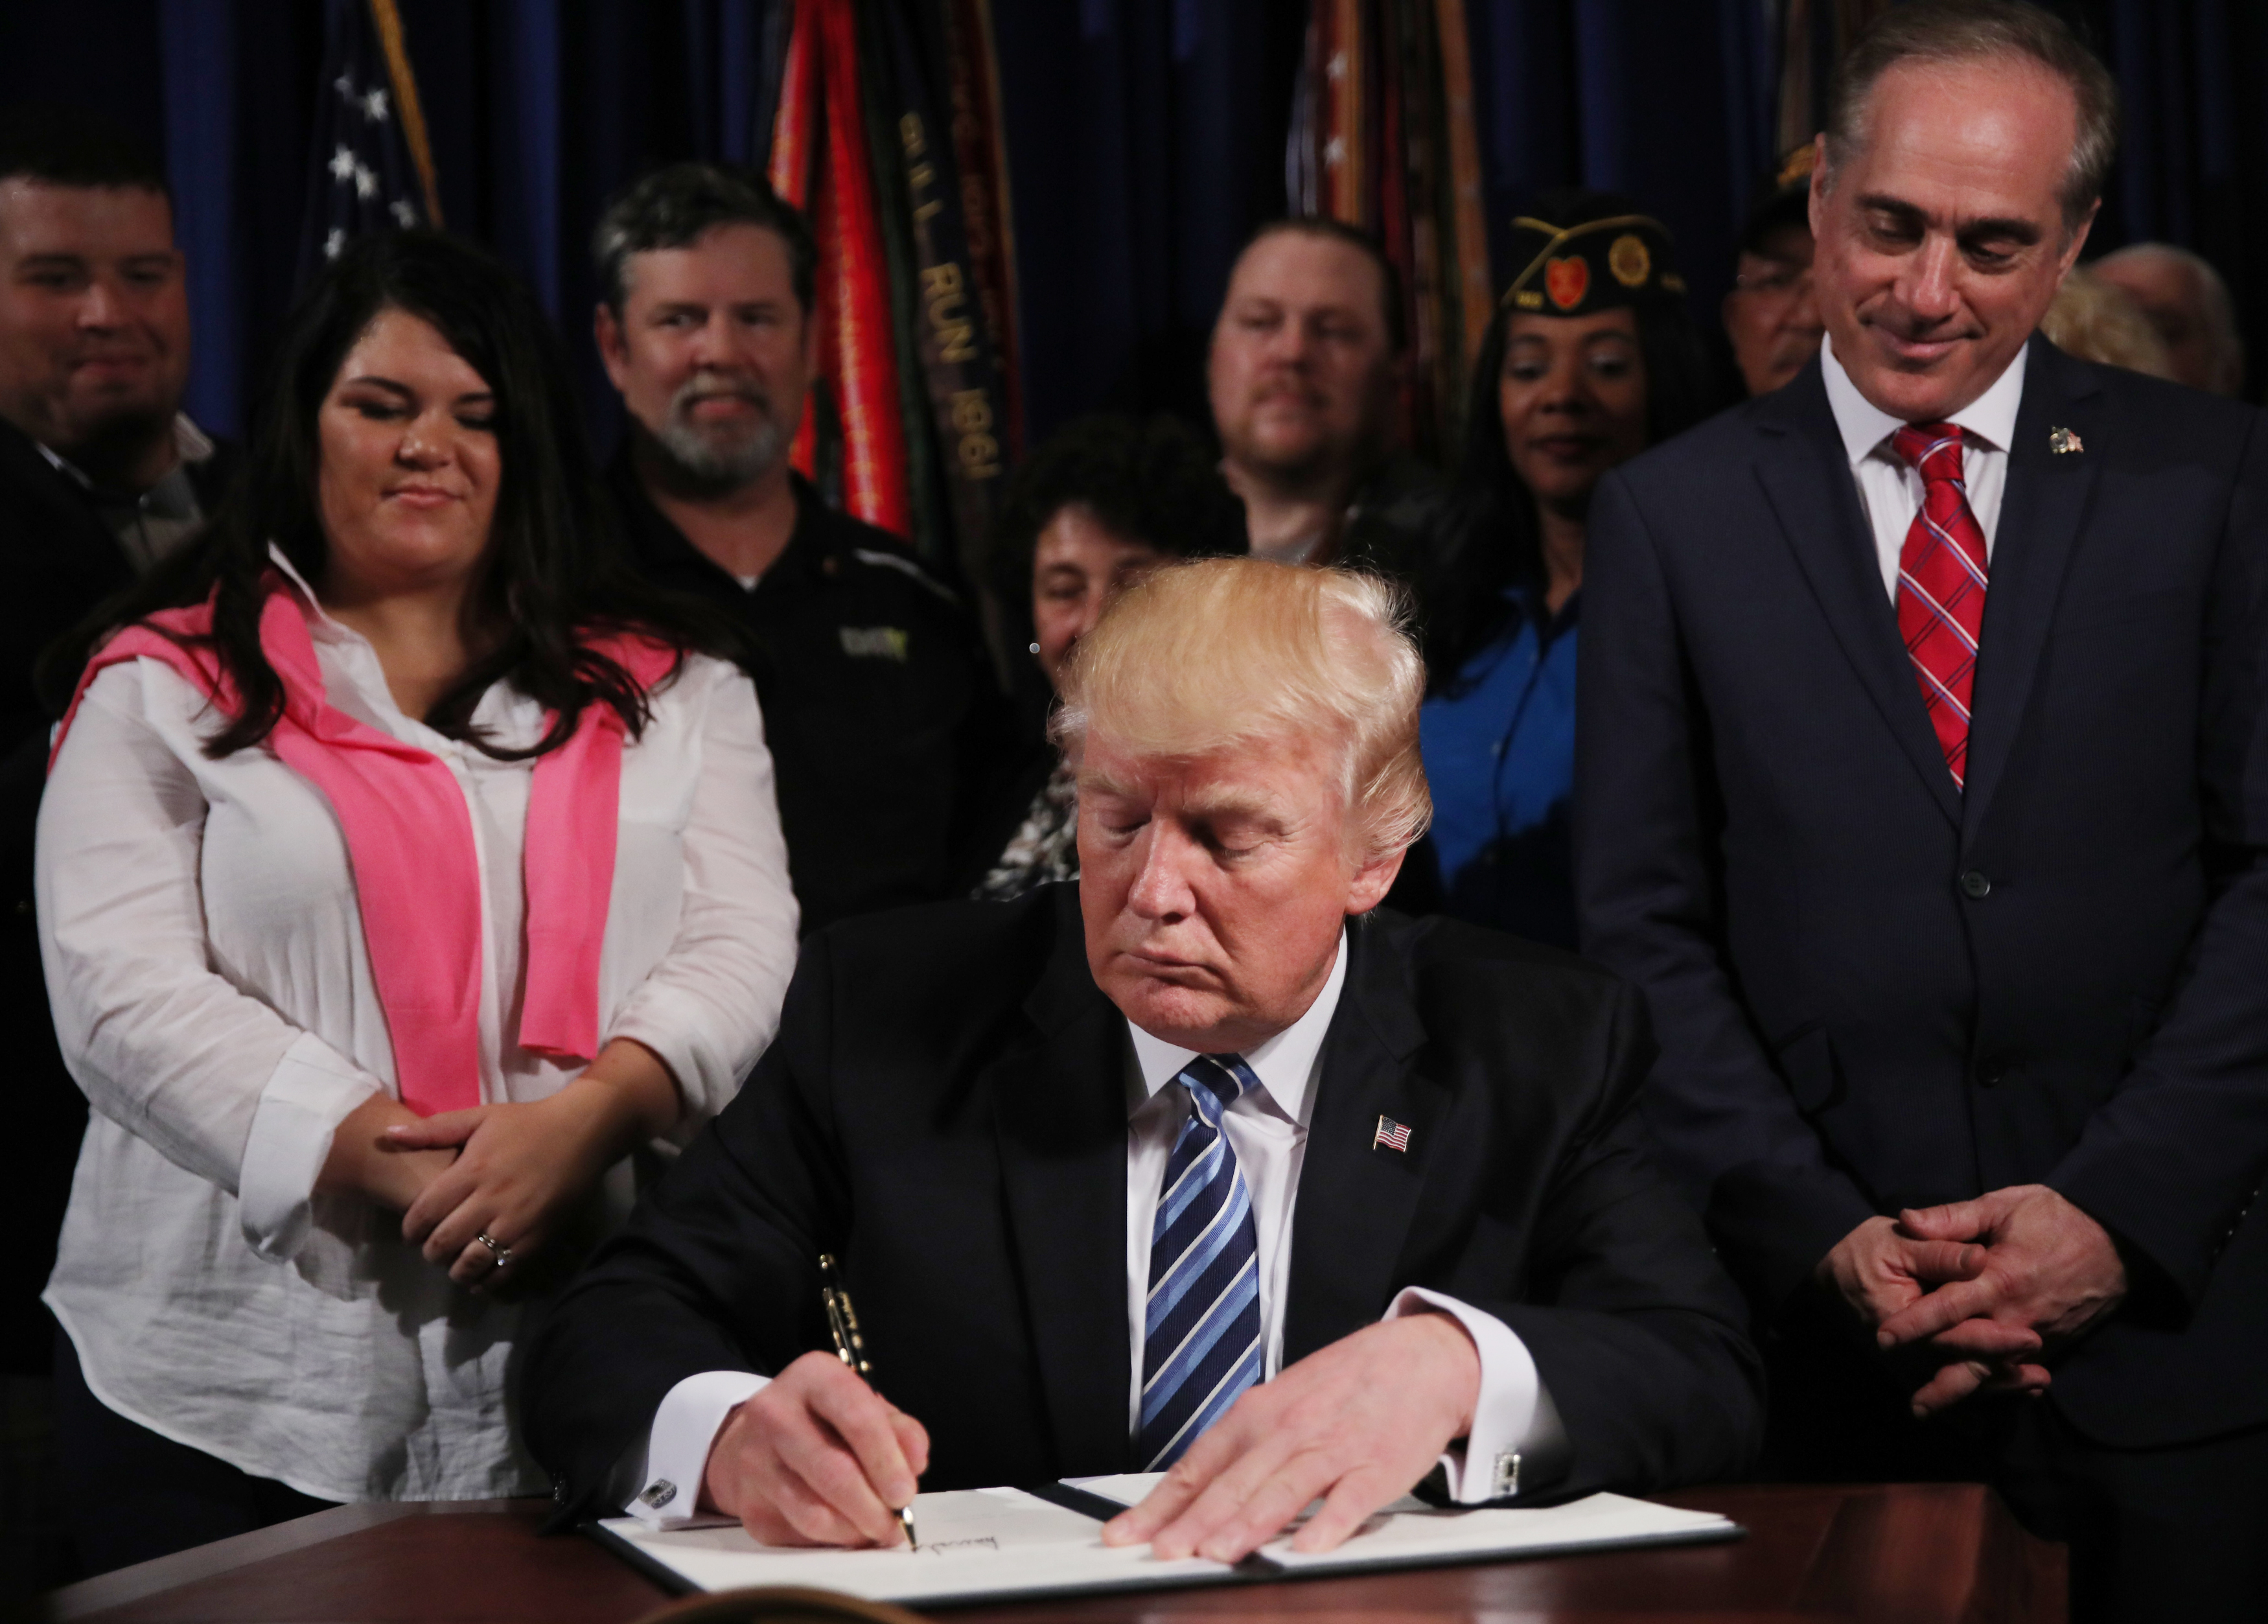 President Donald Trump signs an Executive Order on improving accountability and whistleblower protection at the Veterans Affairs Department in Washington, April 27, 2017. REUTERS/Carlos Barria